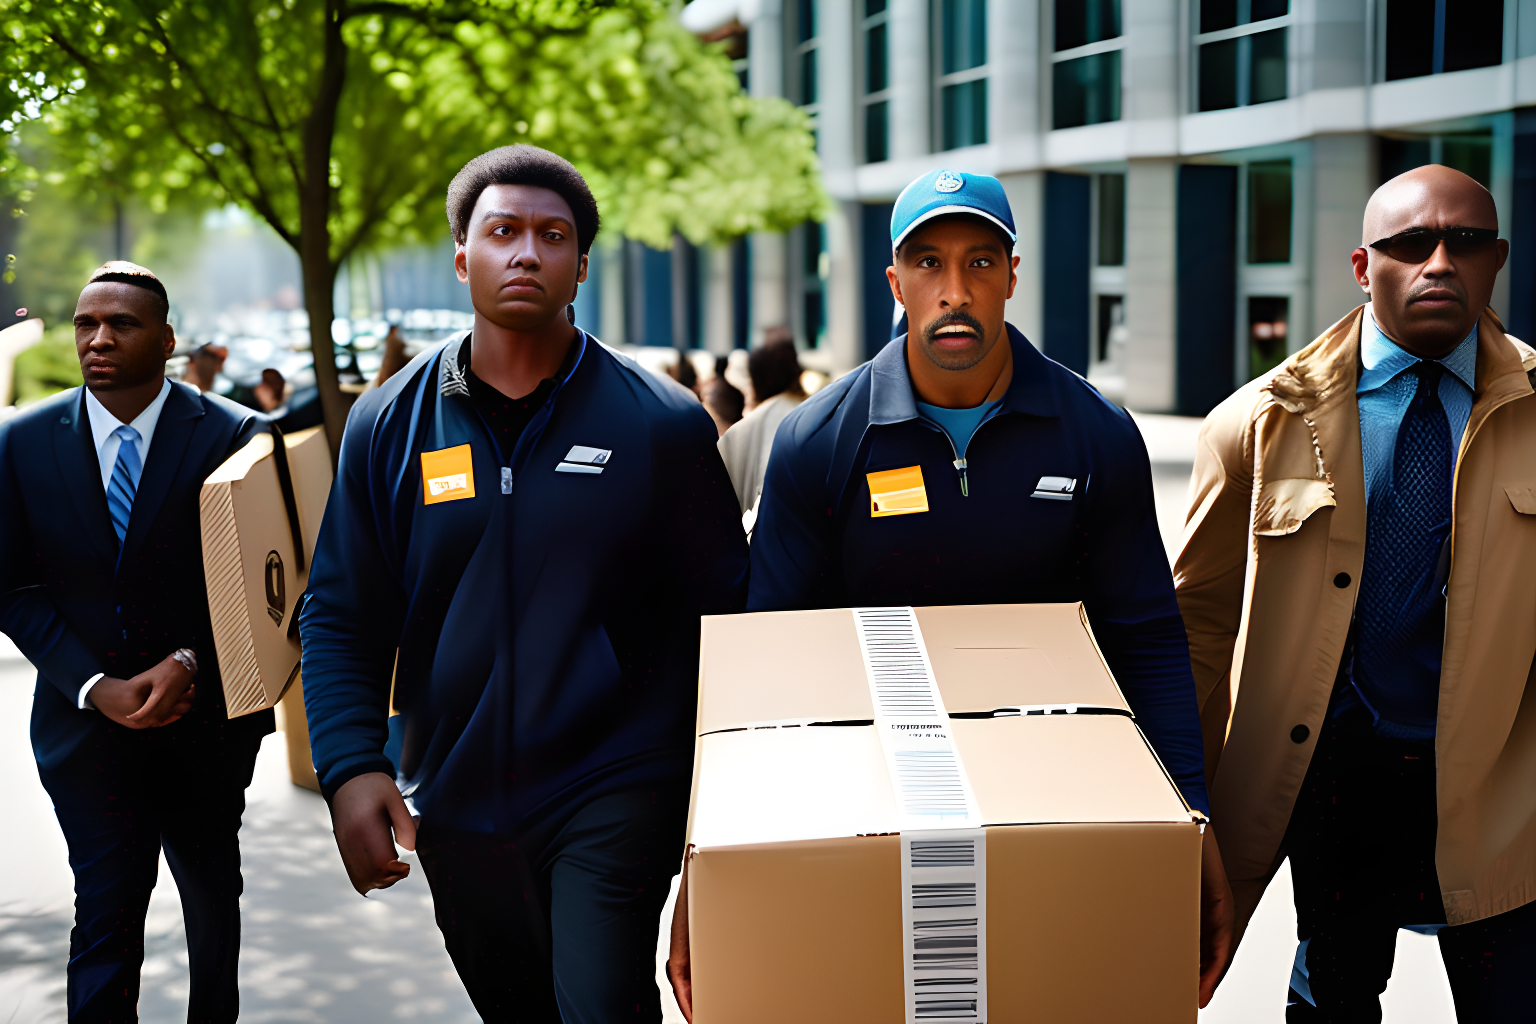 Breathtaking photograph of a group of unhappy people carrying an amazon package. award-winning, professional, highly detailed